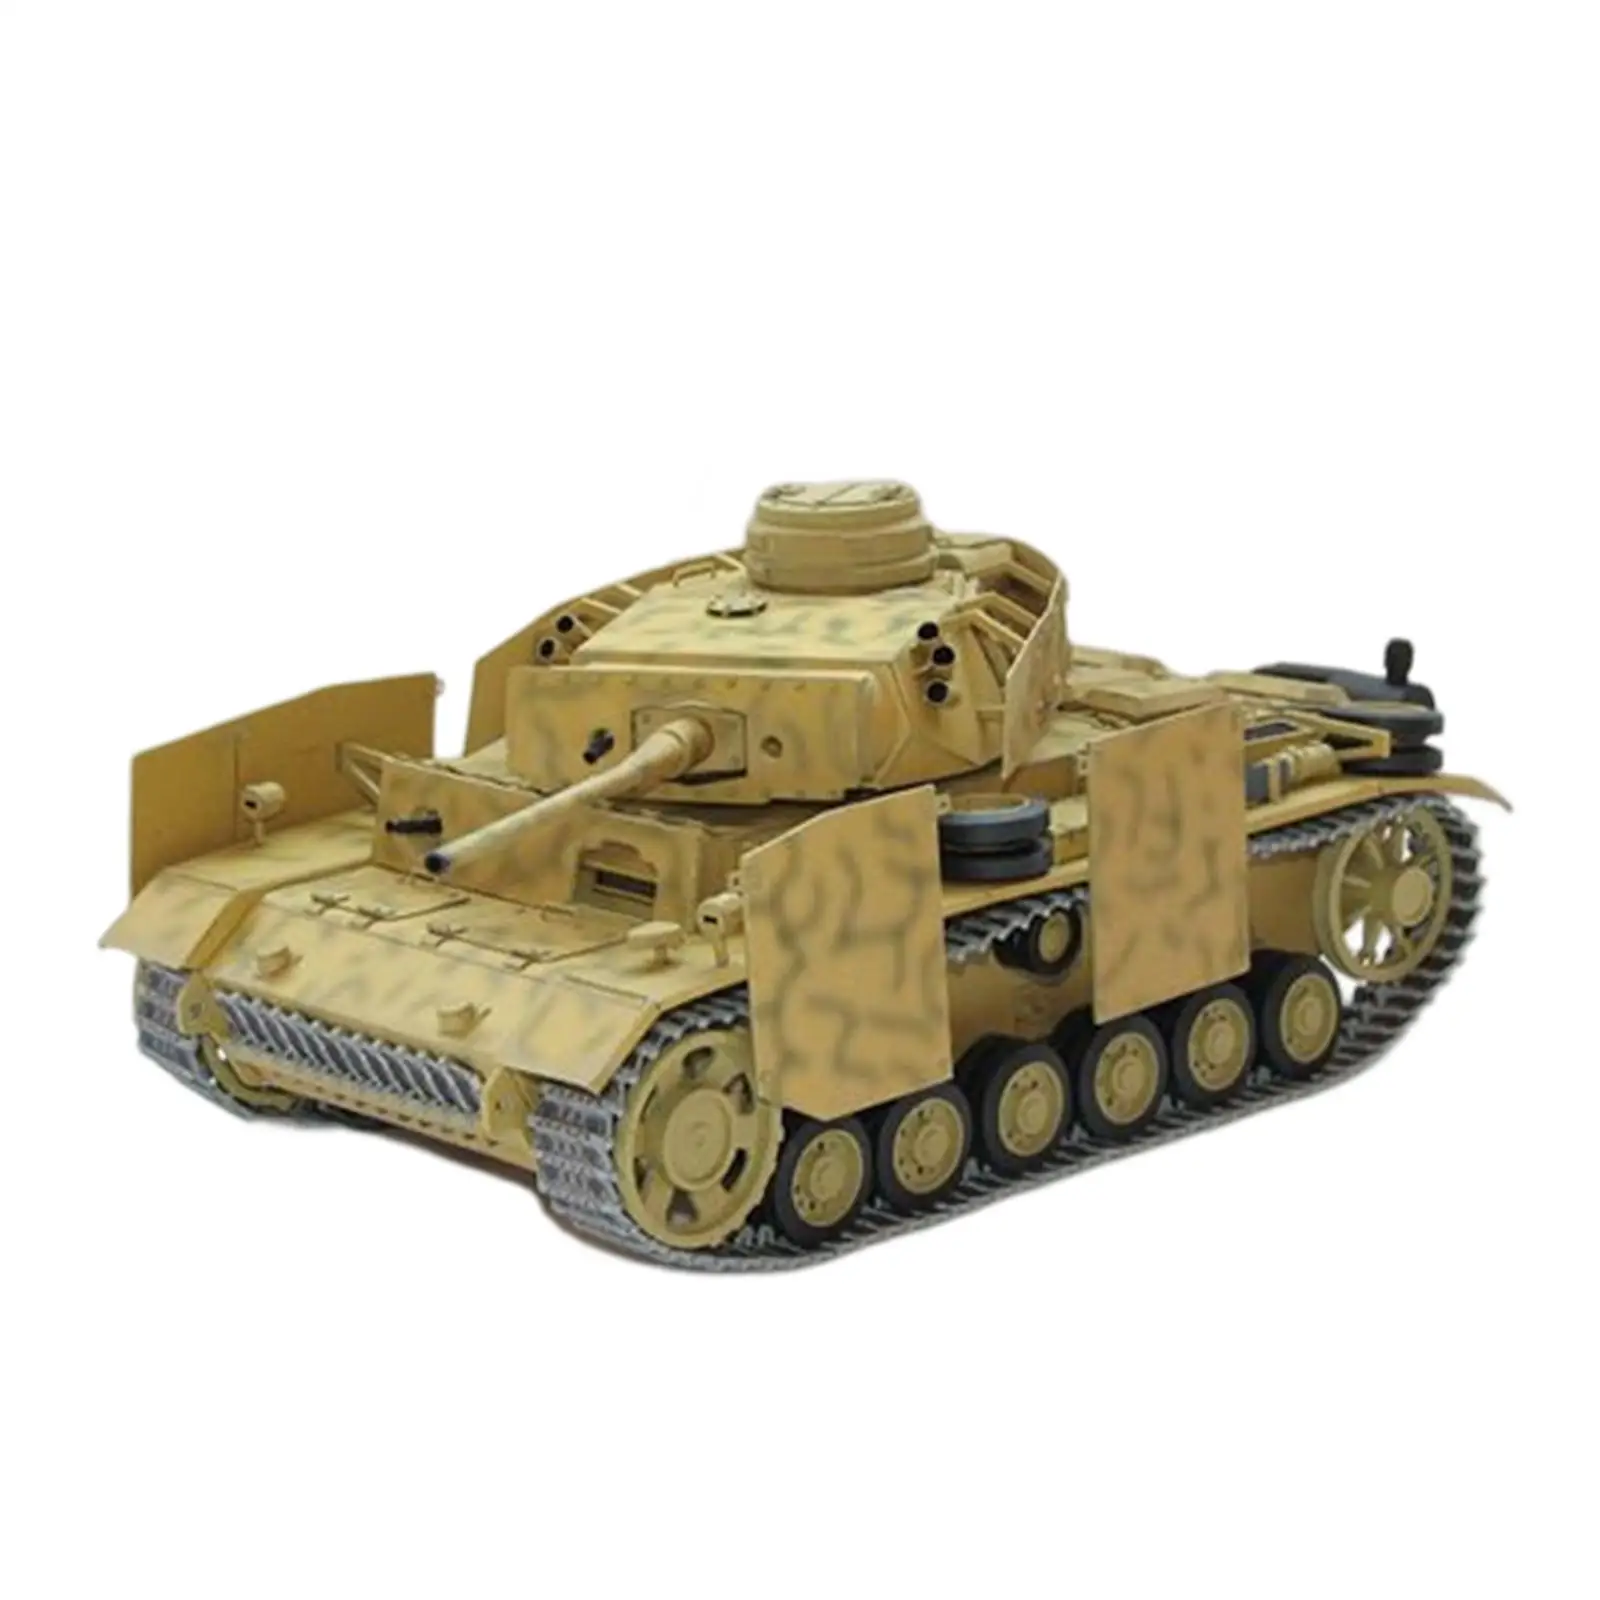 1:25 Scale Tank Model Paper Craft Decorative Toy for Girls Boys